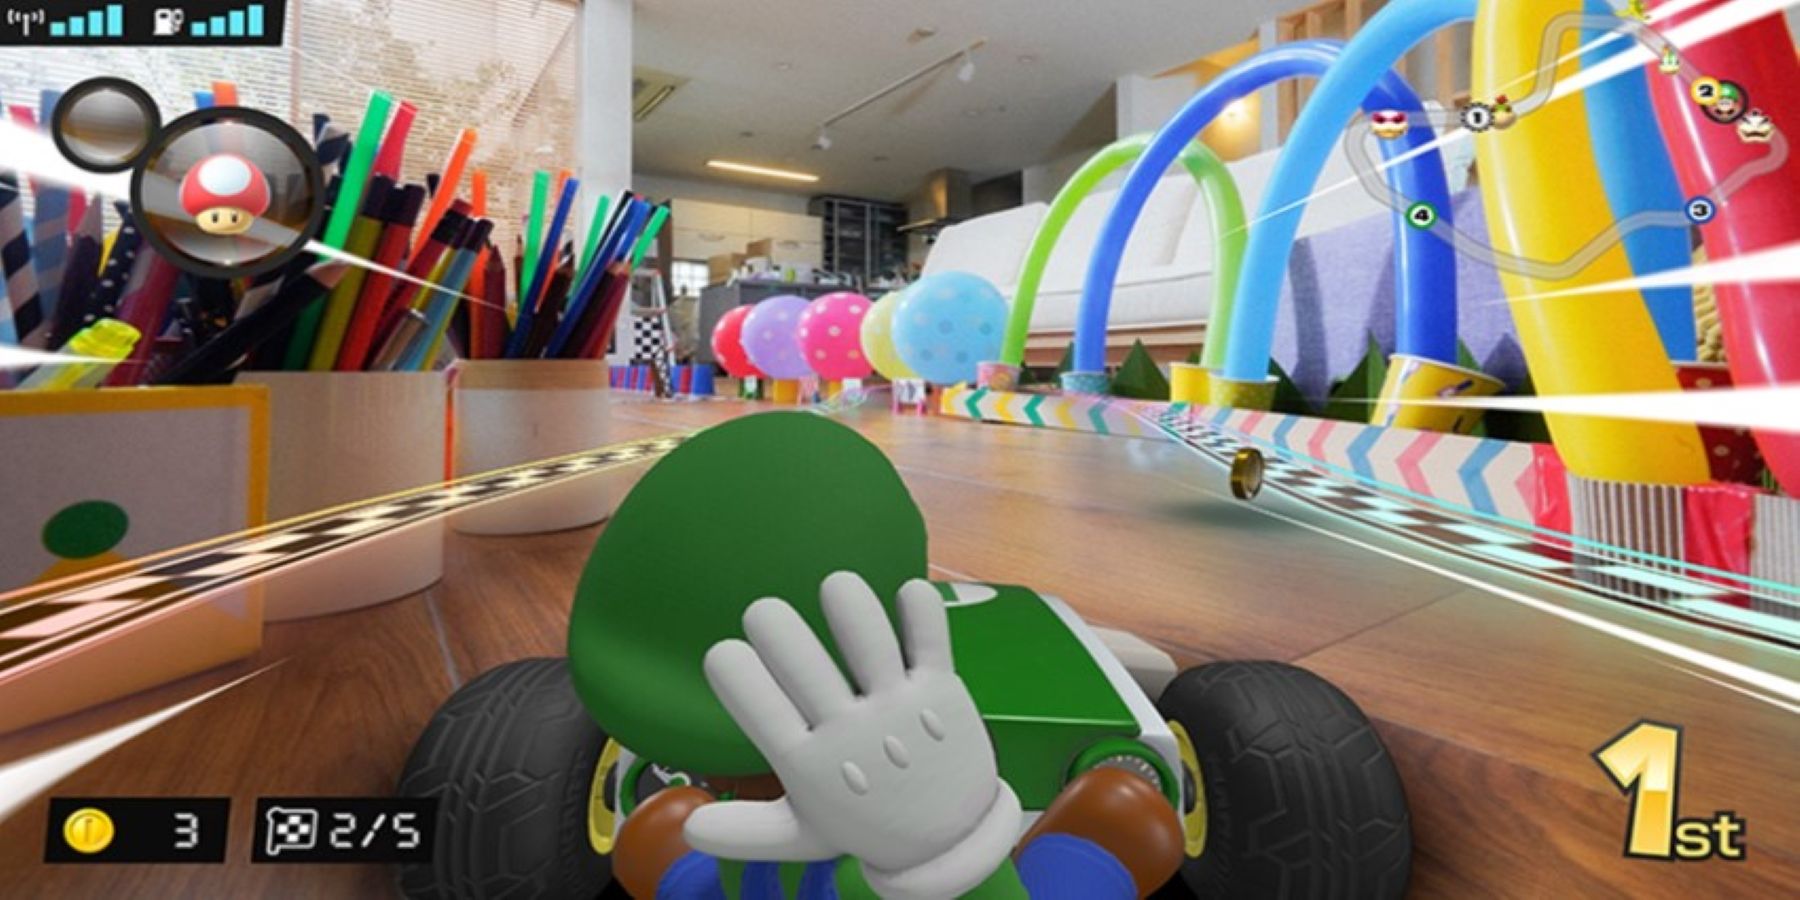 The best Mario Kart Live: Home Circuit deals in February 2024